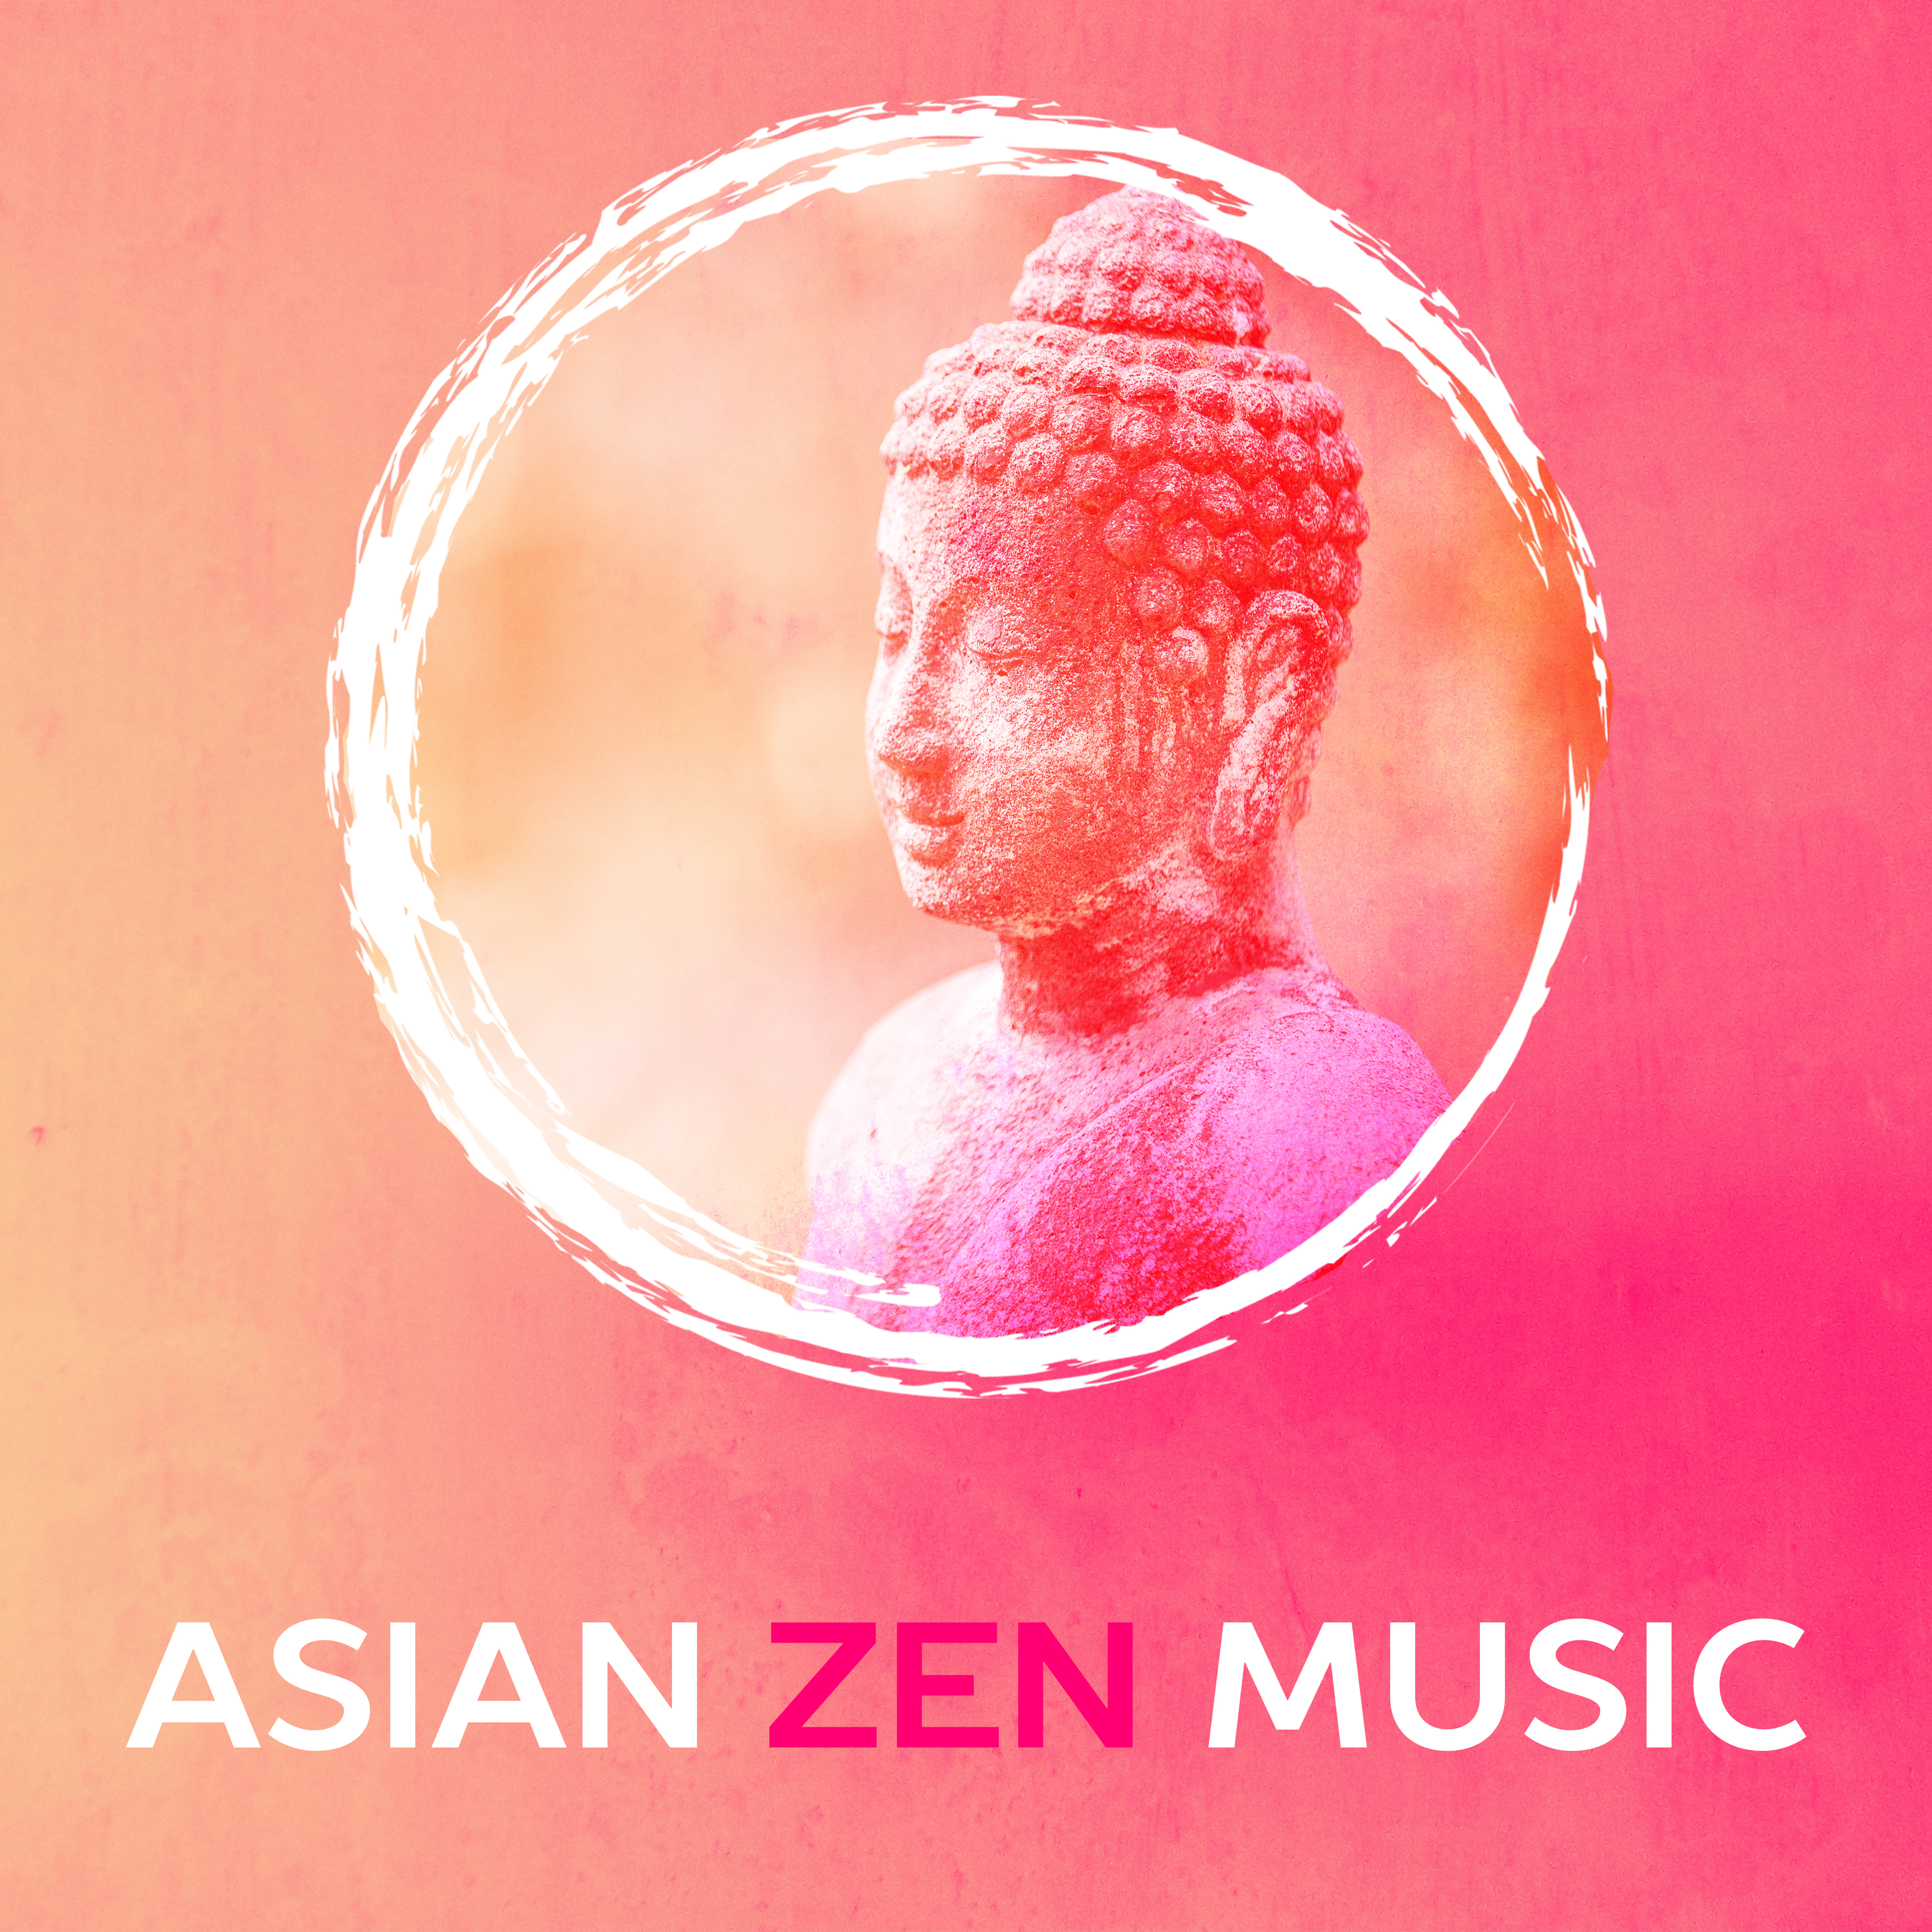 Asian Zen Music  Soft Music to Meditate in Peace, New Age Relaxation for Spirit, Chilled Sounds for Inner Calmness